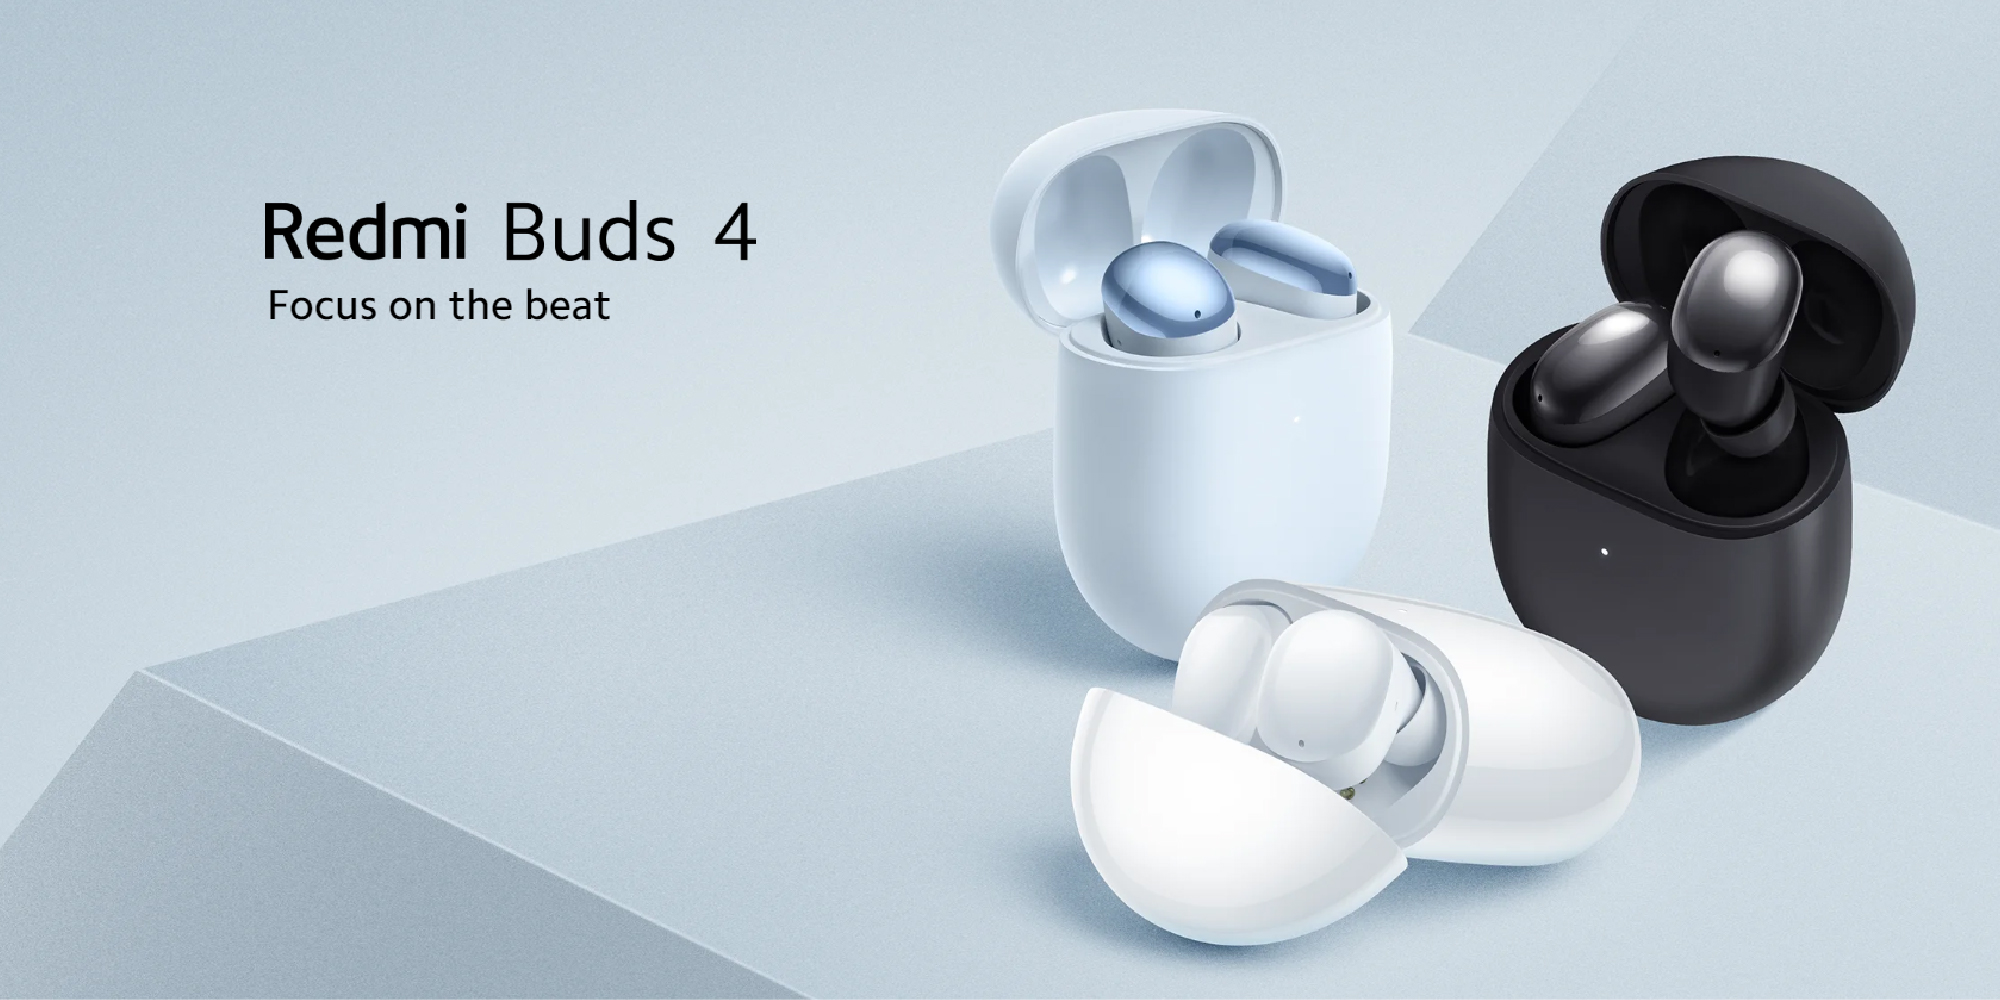 Xiaomi Redmi Buds 4: 35dB Hybrid Active Noise Cancellation, 3 Adaptive ANC Modes, AI Noise Reduction, IP54 Dust and Water Resistance